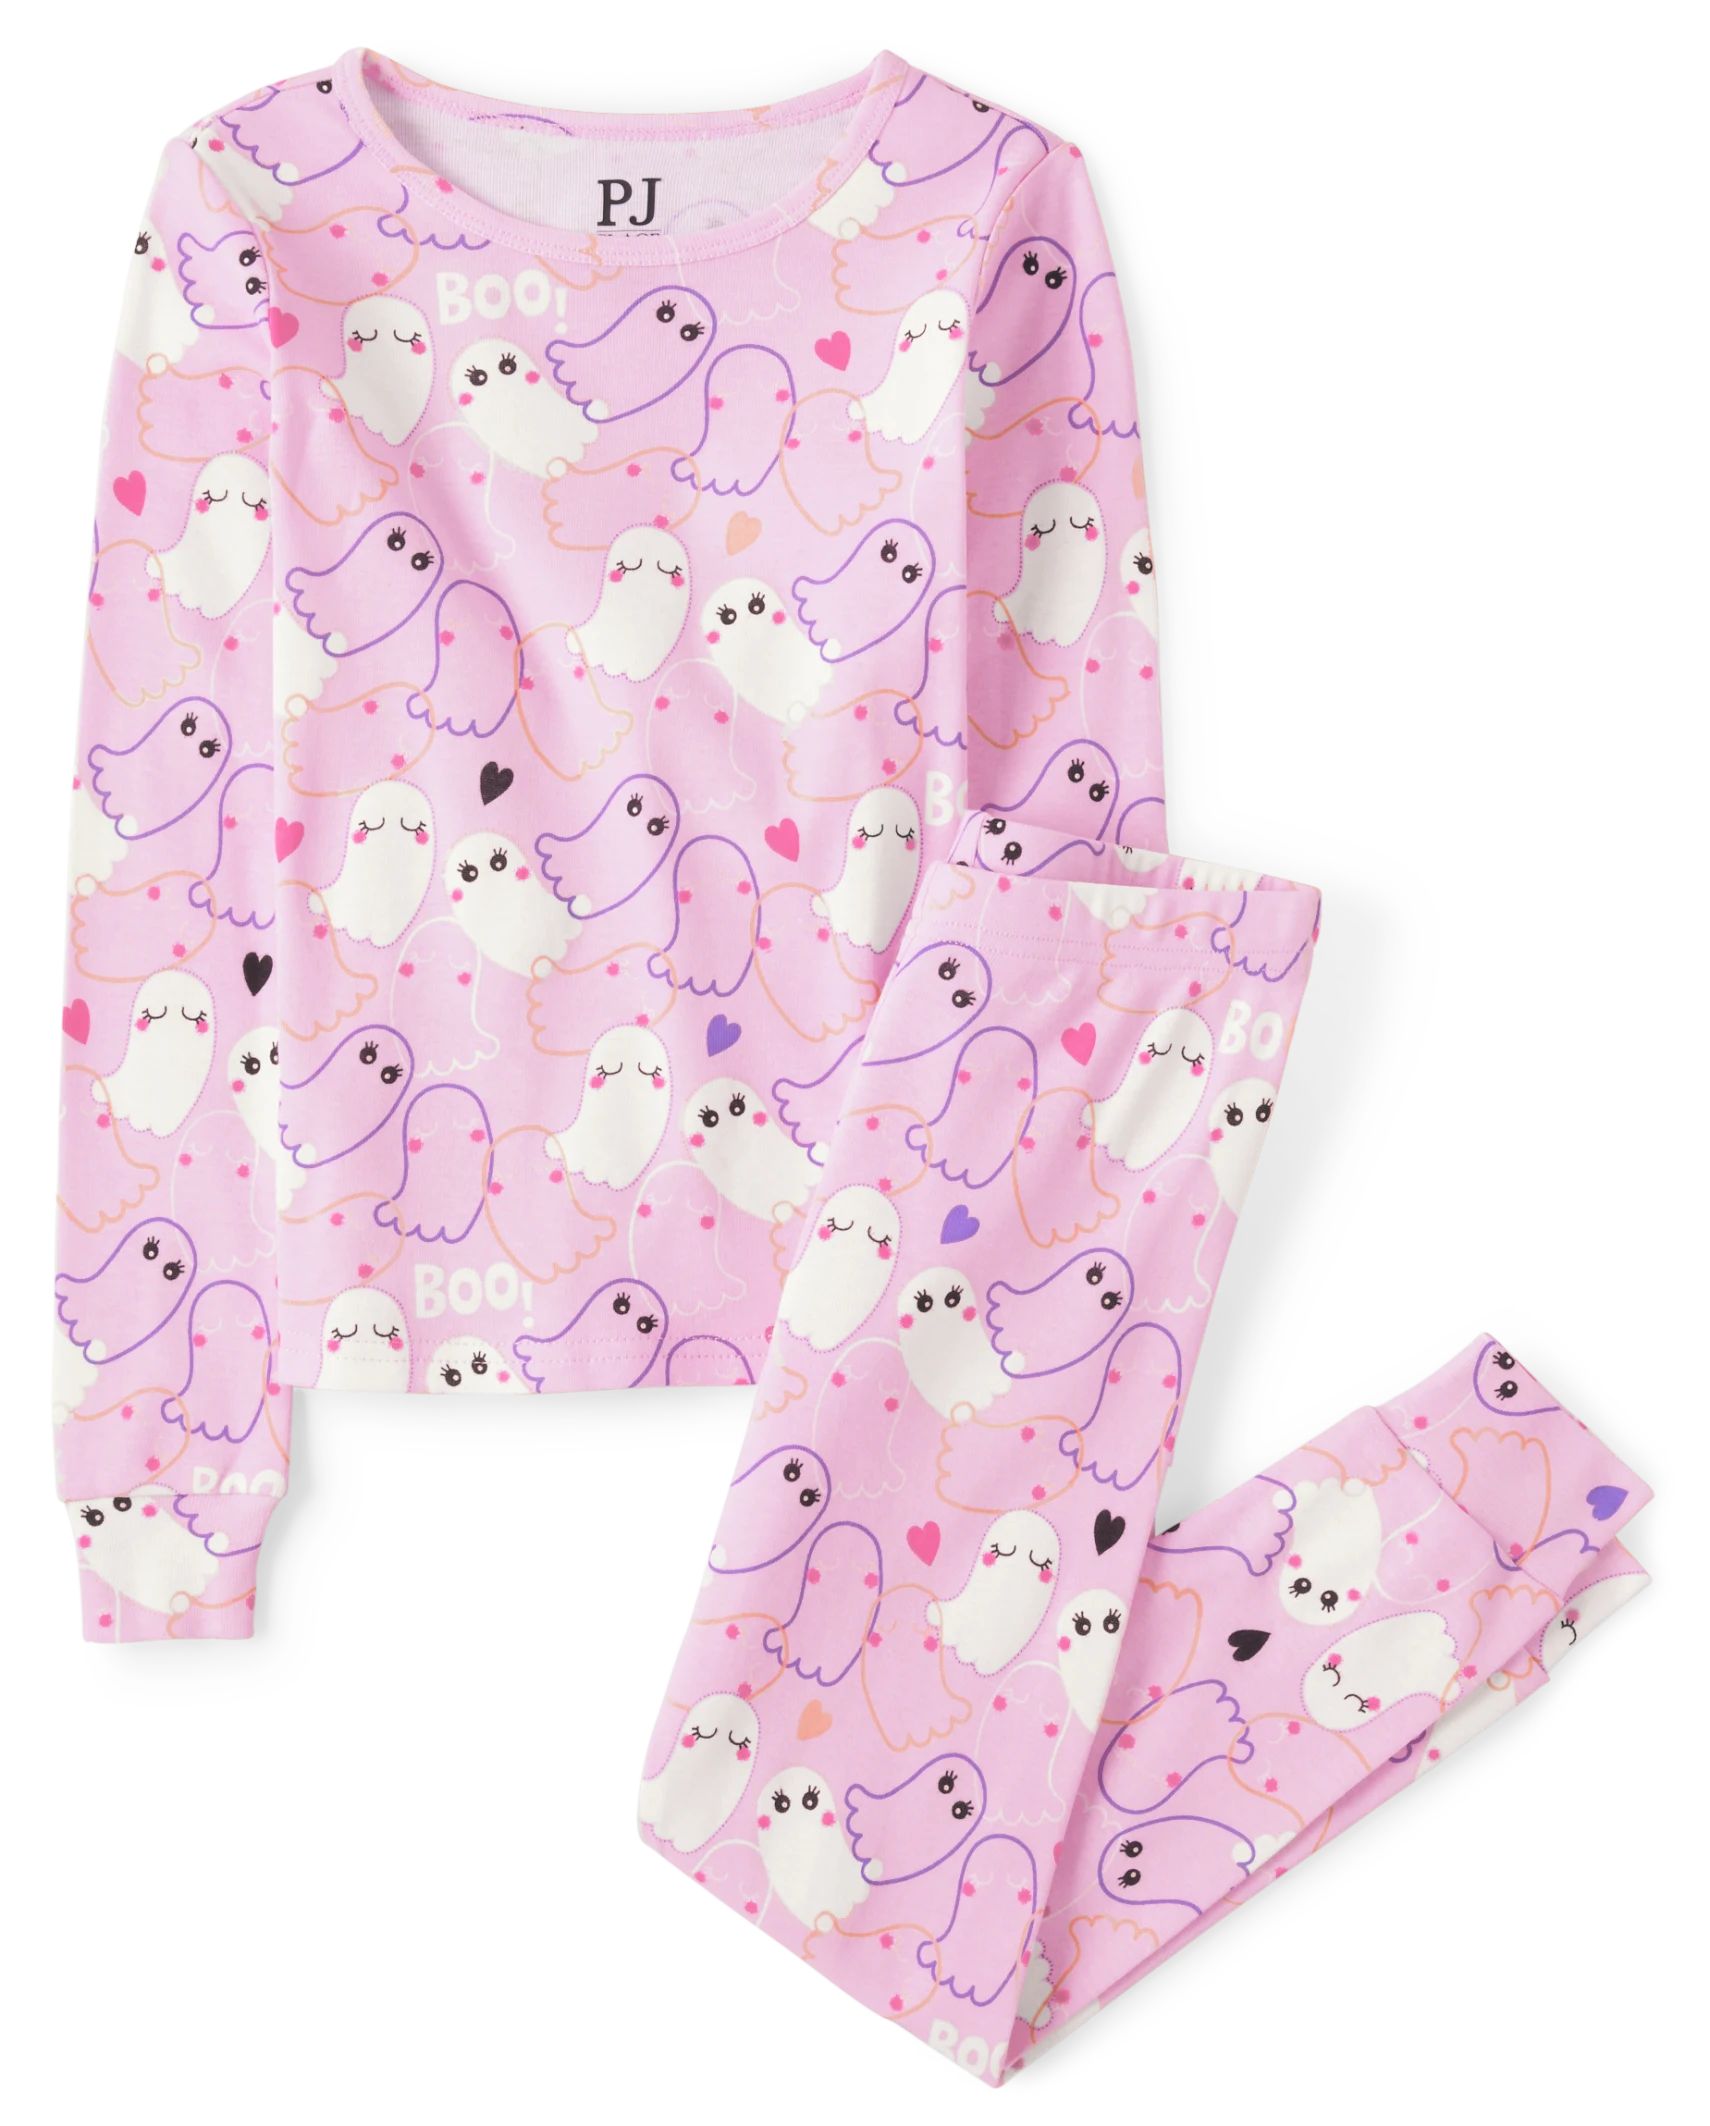 Girls Glow Ghost Snug Fit Cotton Pajamas - charisma | The Children's Place